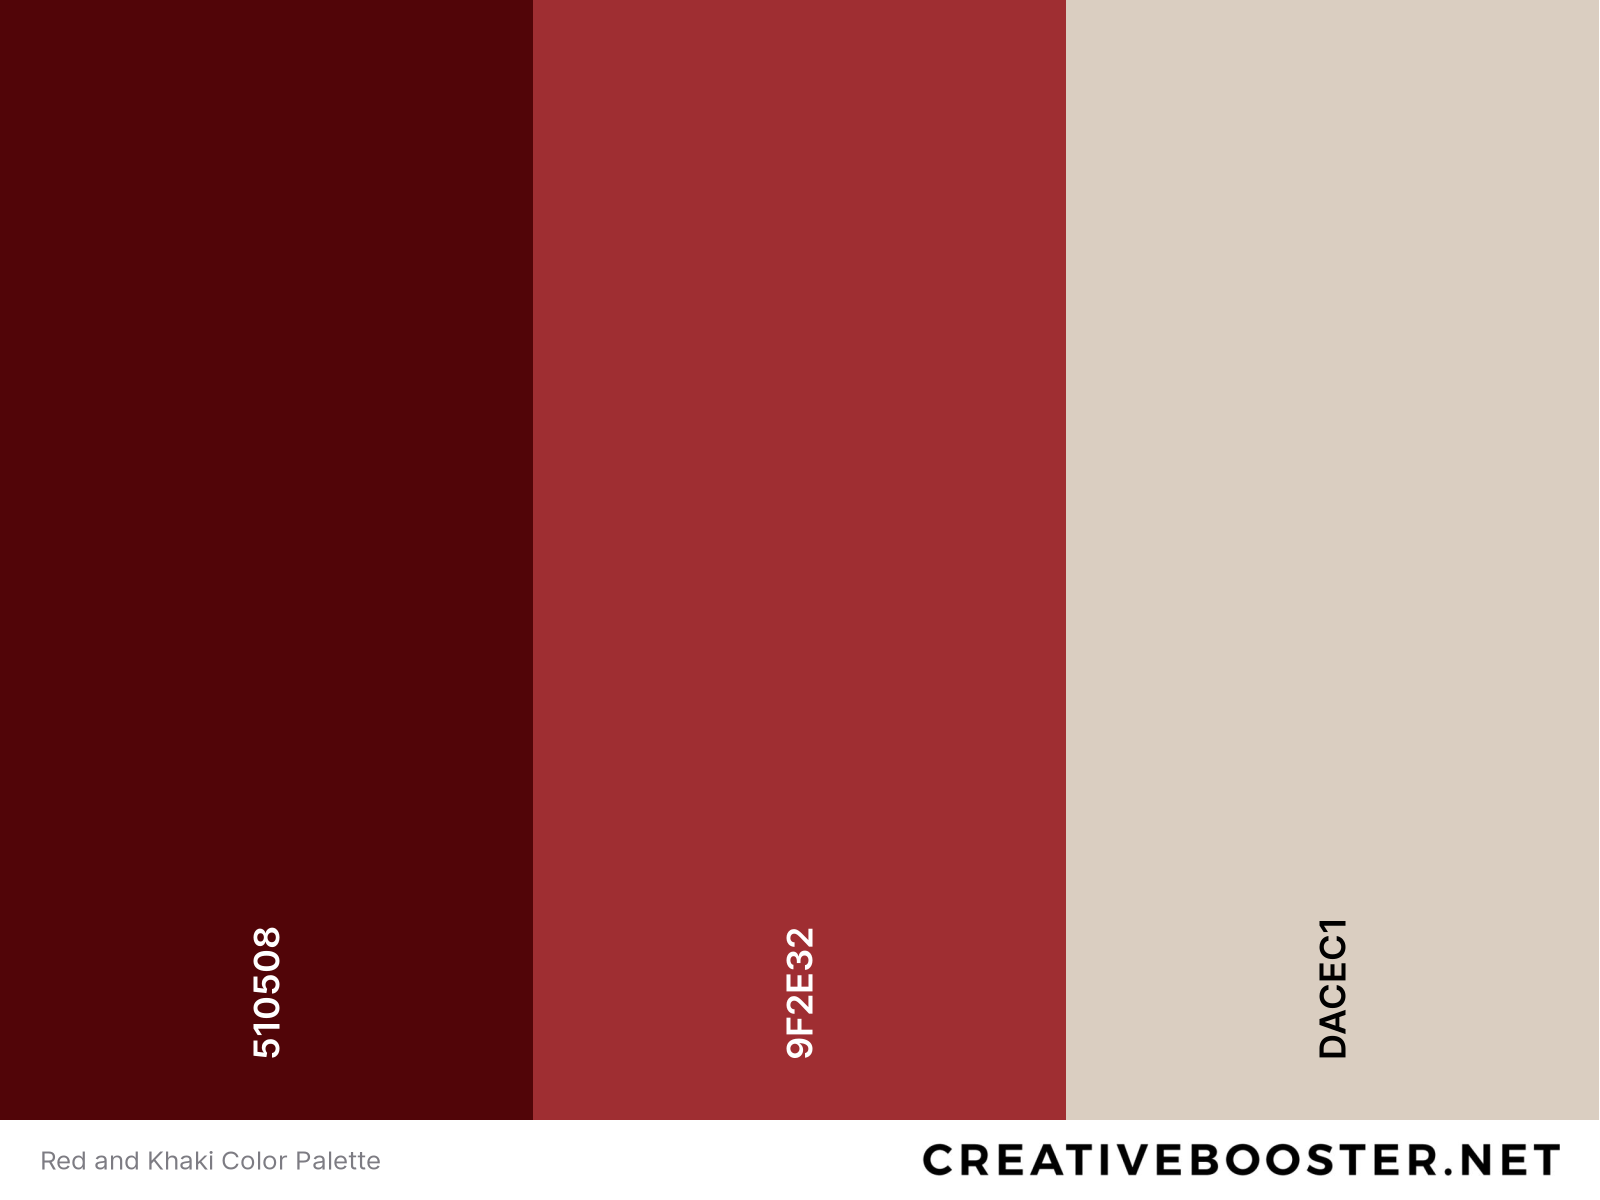 Red and Khaki Color Palette